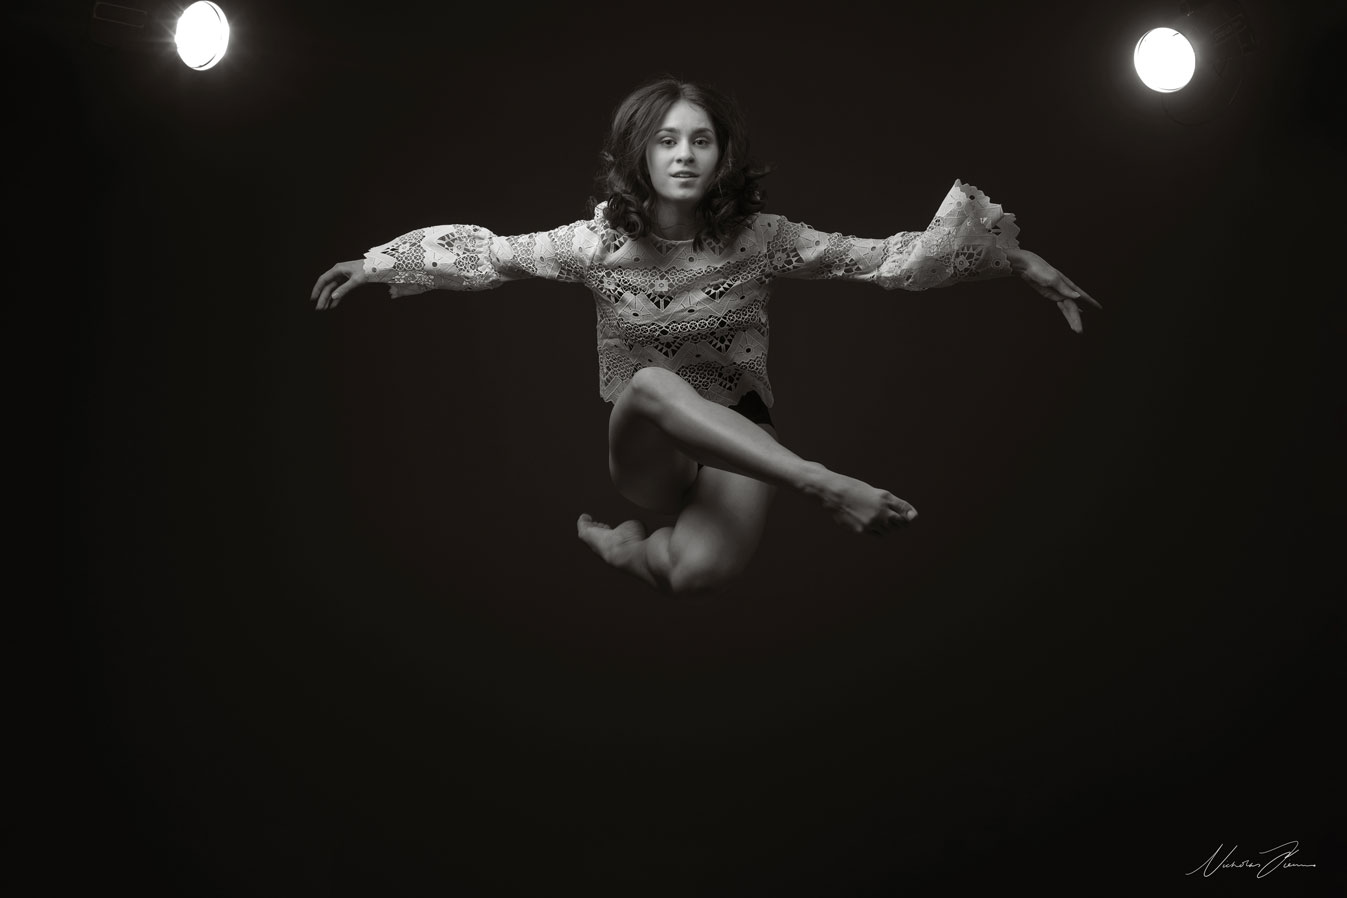 Black and white portrait of classical ballet and contemporary dance teacher Pheobe Walker, captured mid-air